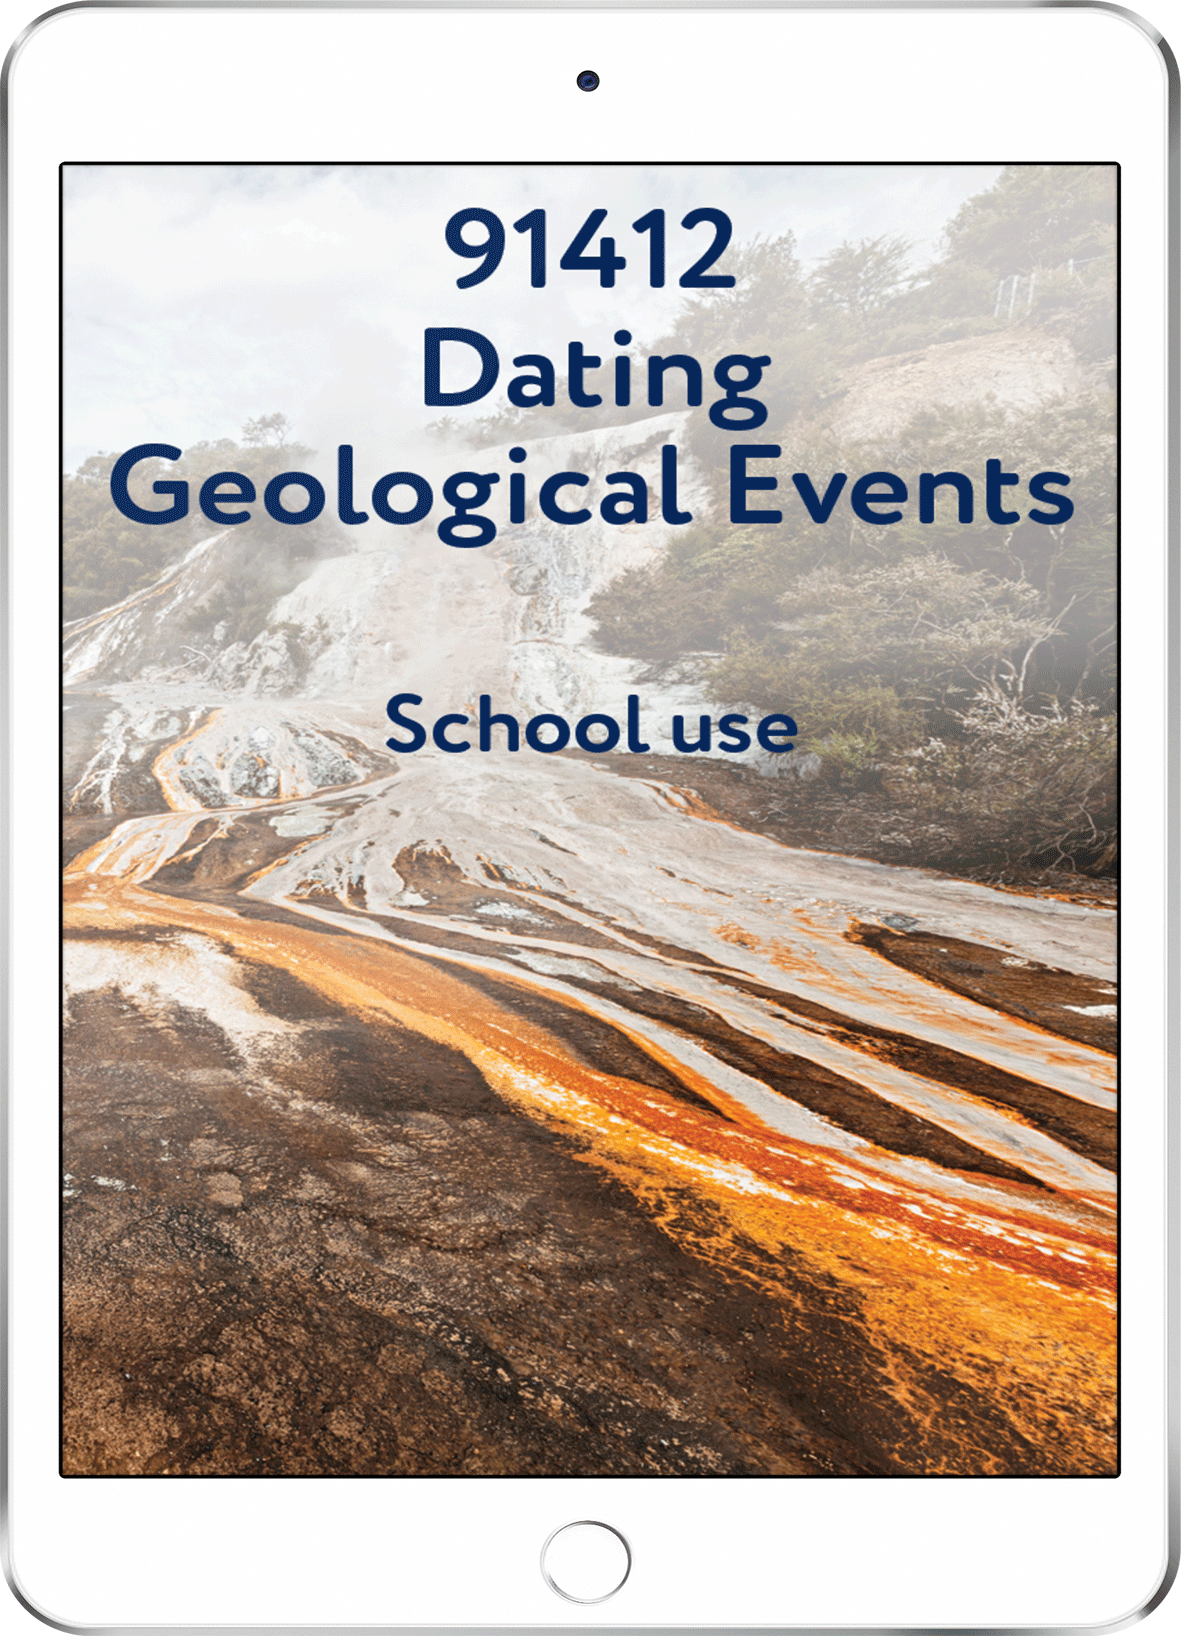 91412 Dating Geological Events - School Use